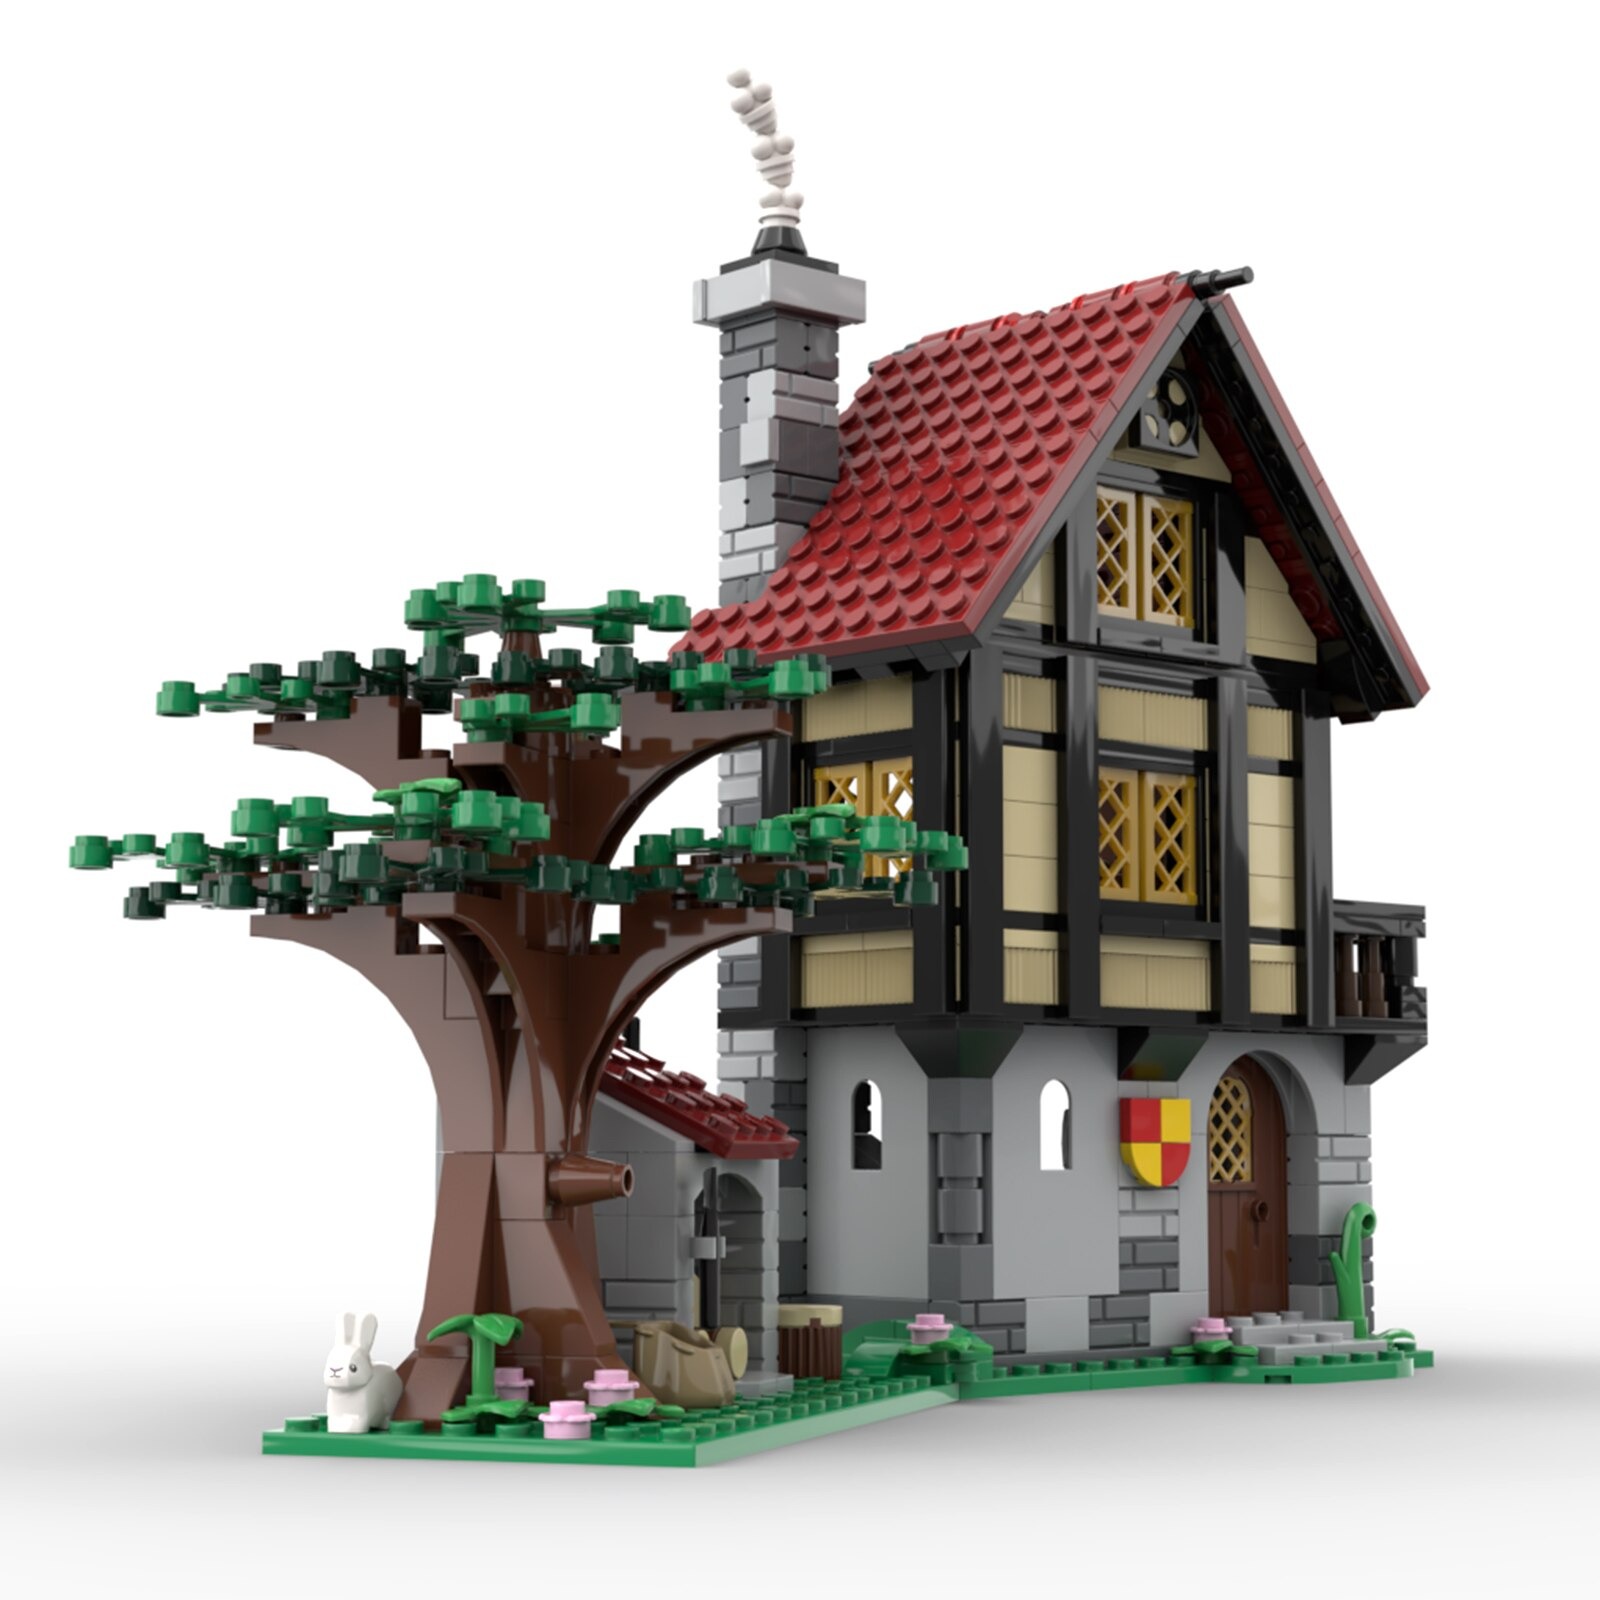 authorized moc 82740 medieval house 524 p main 1 1 - MOULD KING